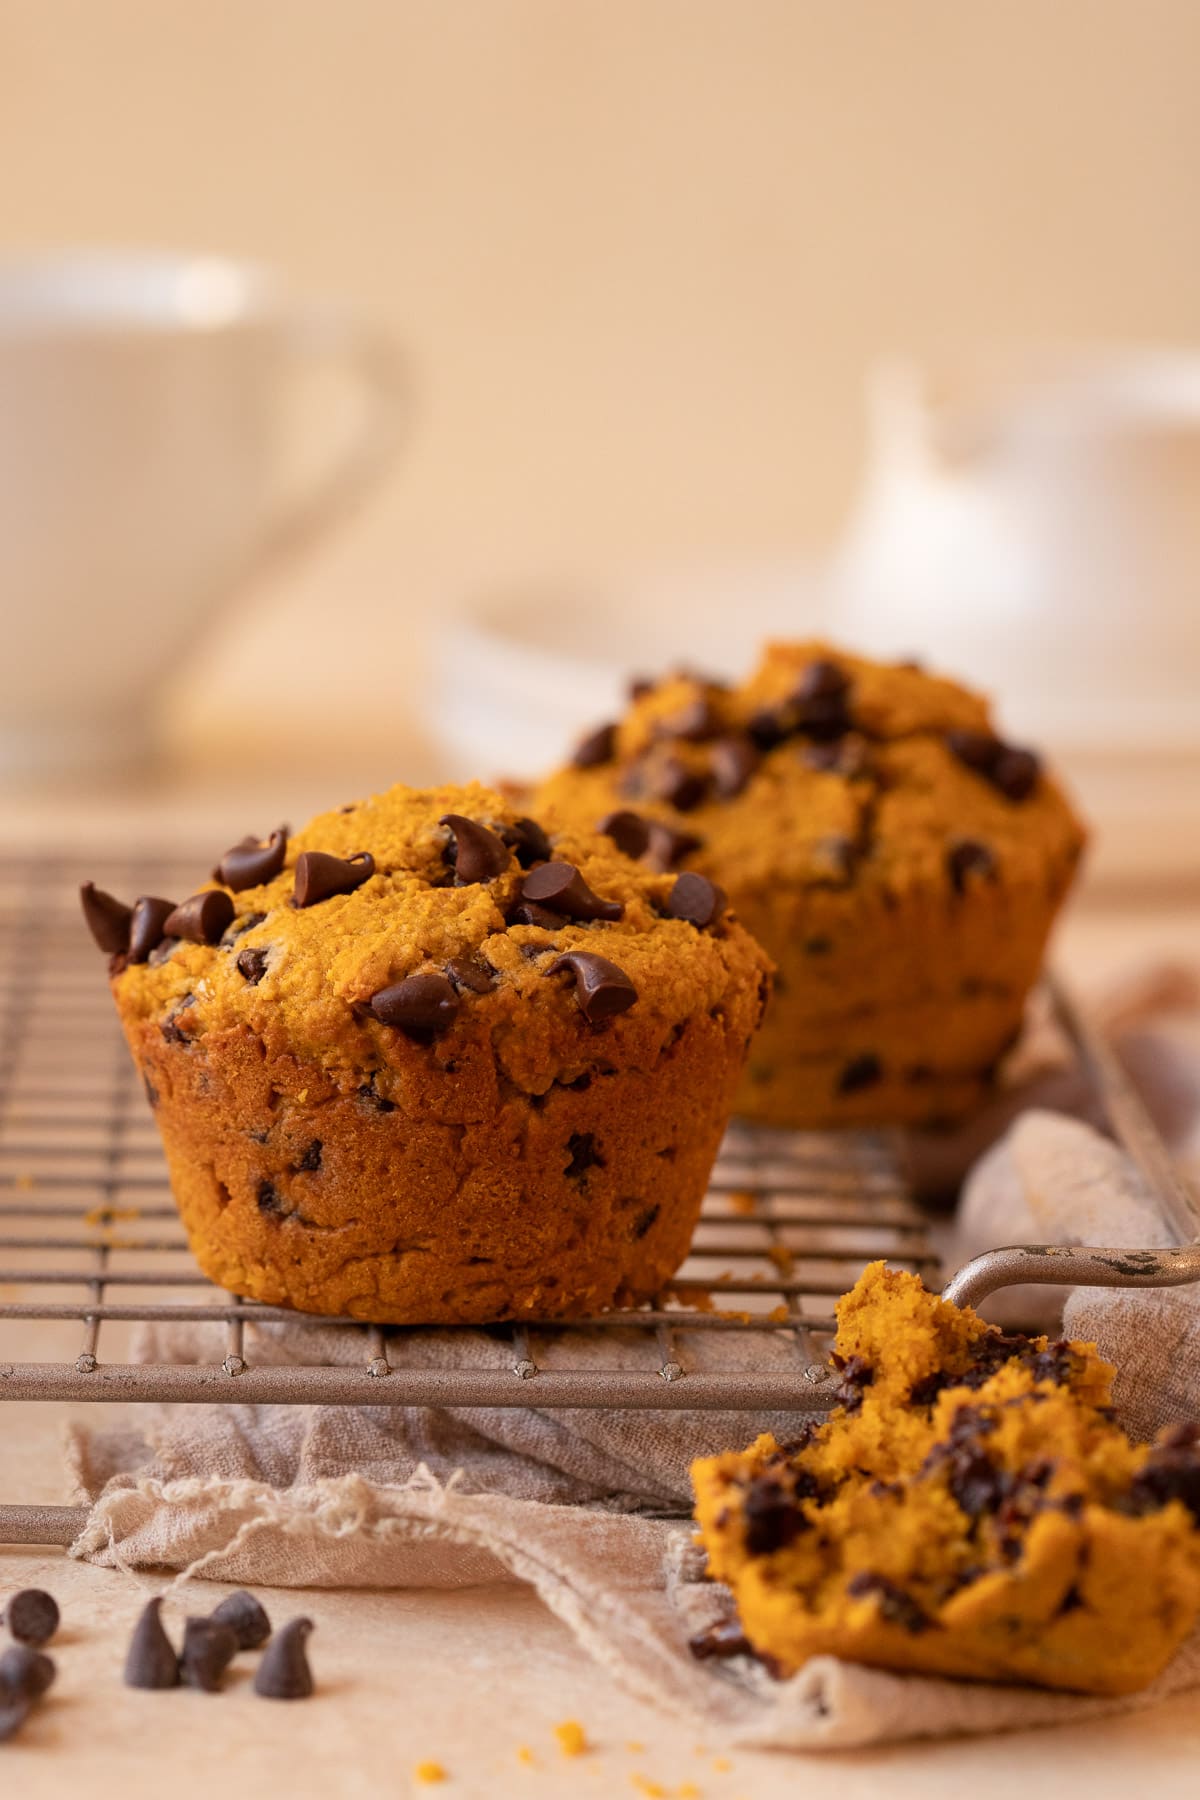 Two muffins on a wire cooling rack, with a portion of a third muffin in the foreground showing the crumb.